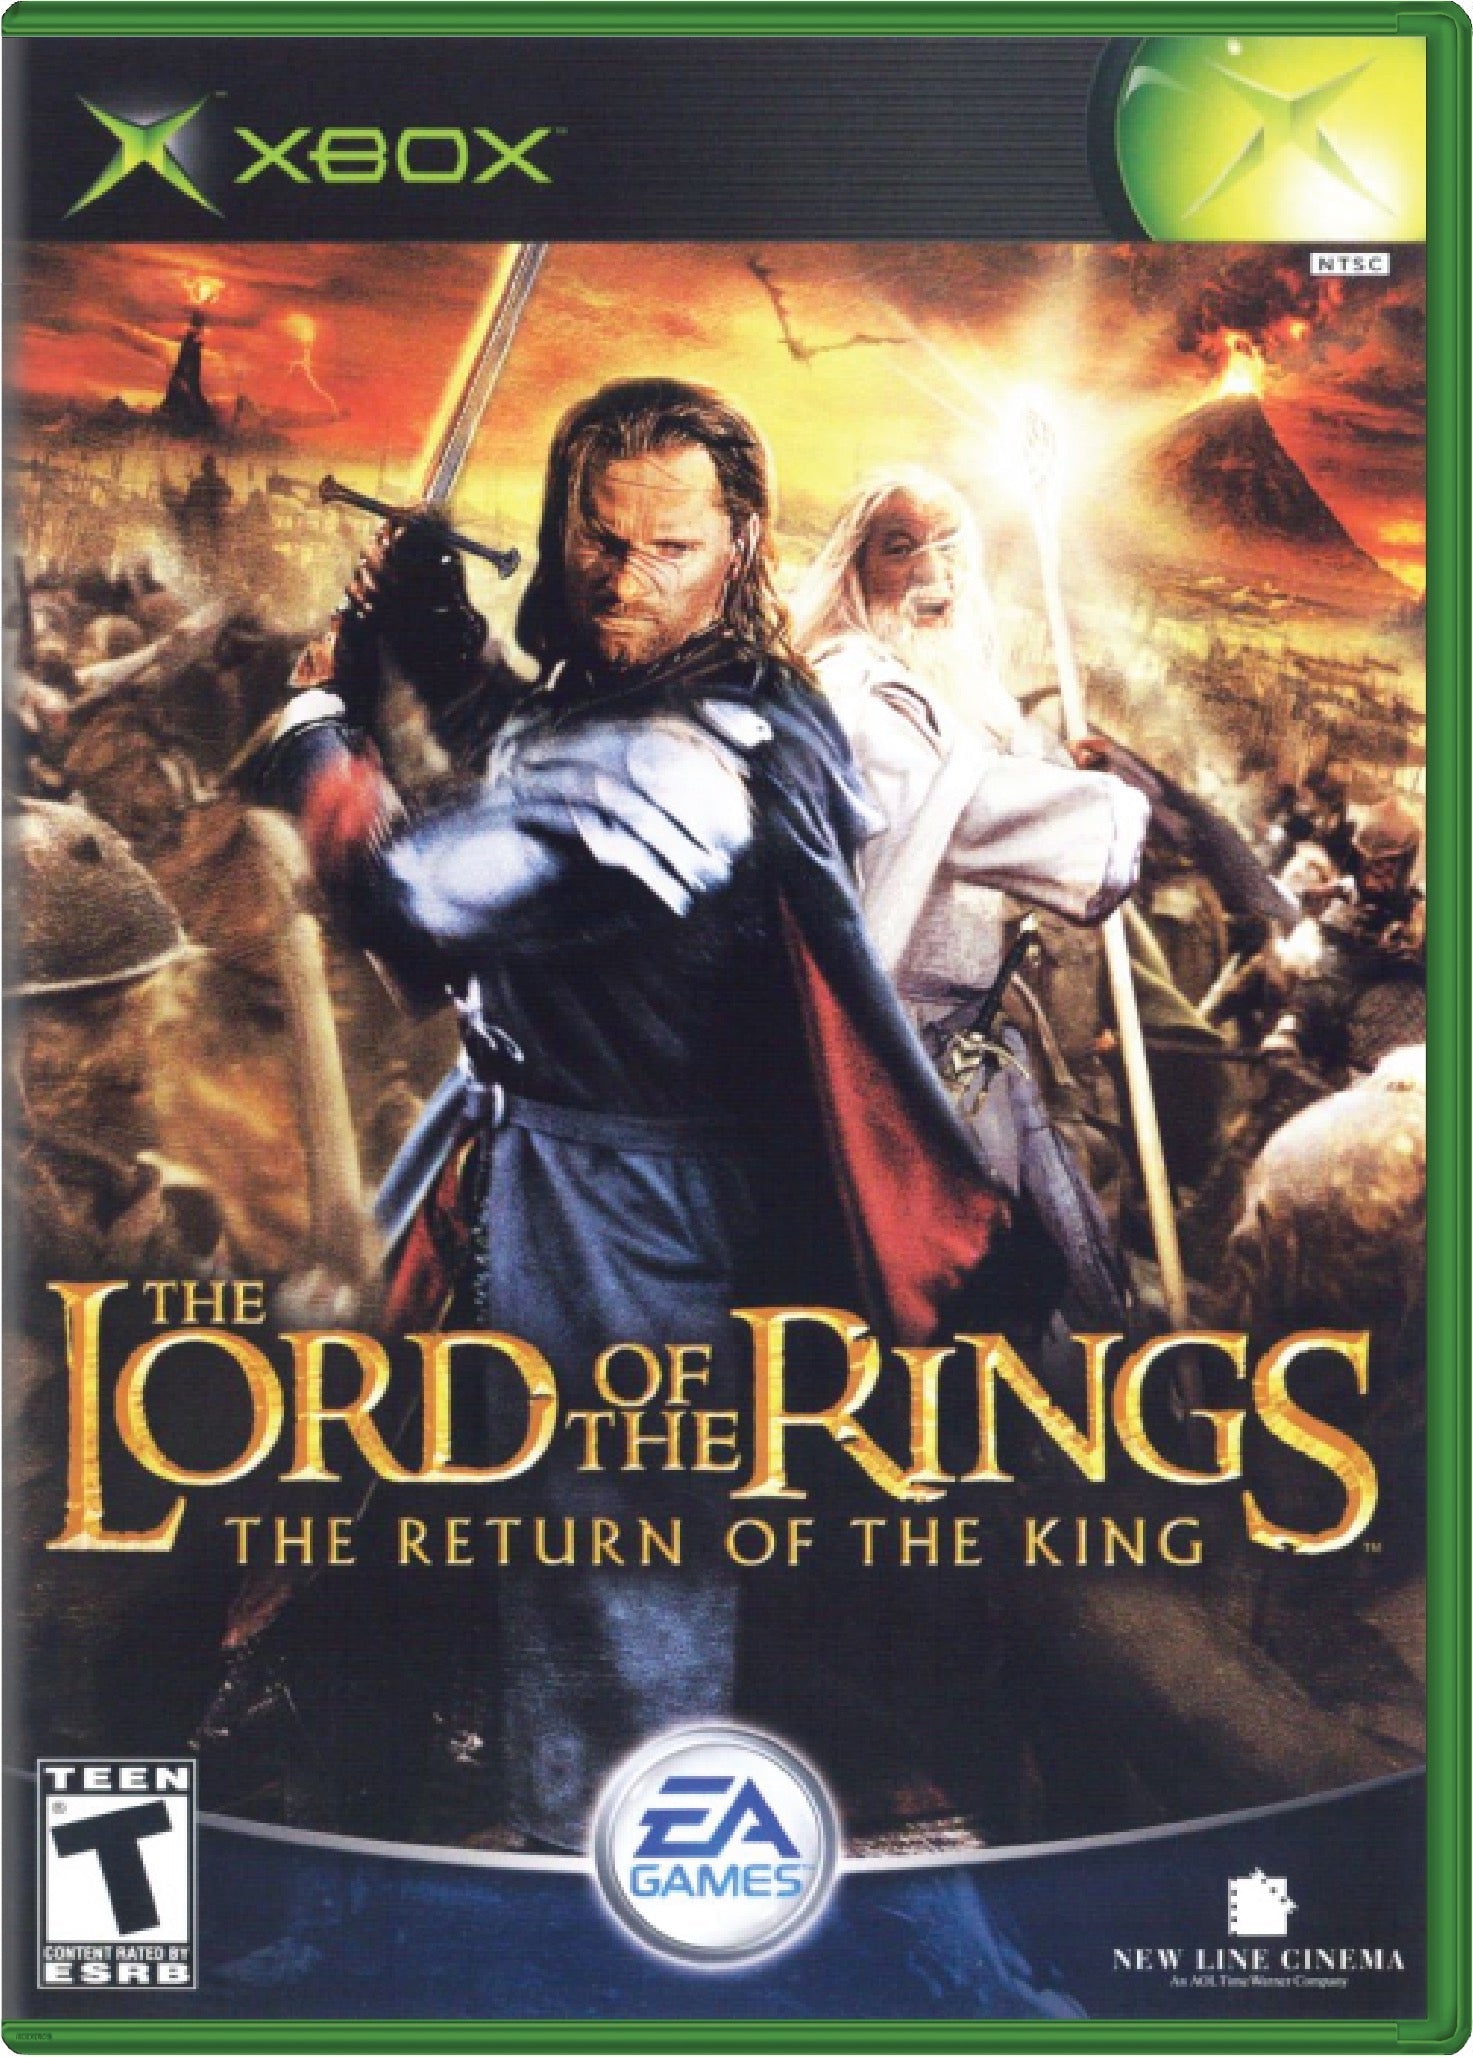 The Lord of the Rings Return of the King Cover Art